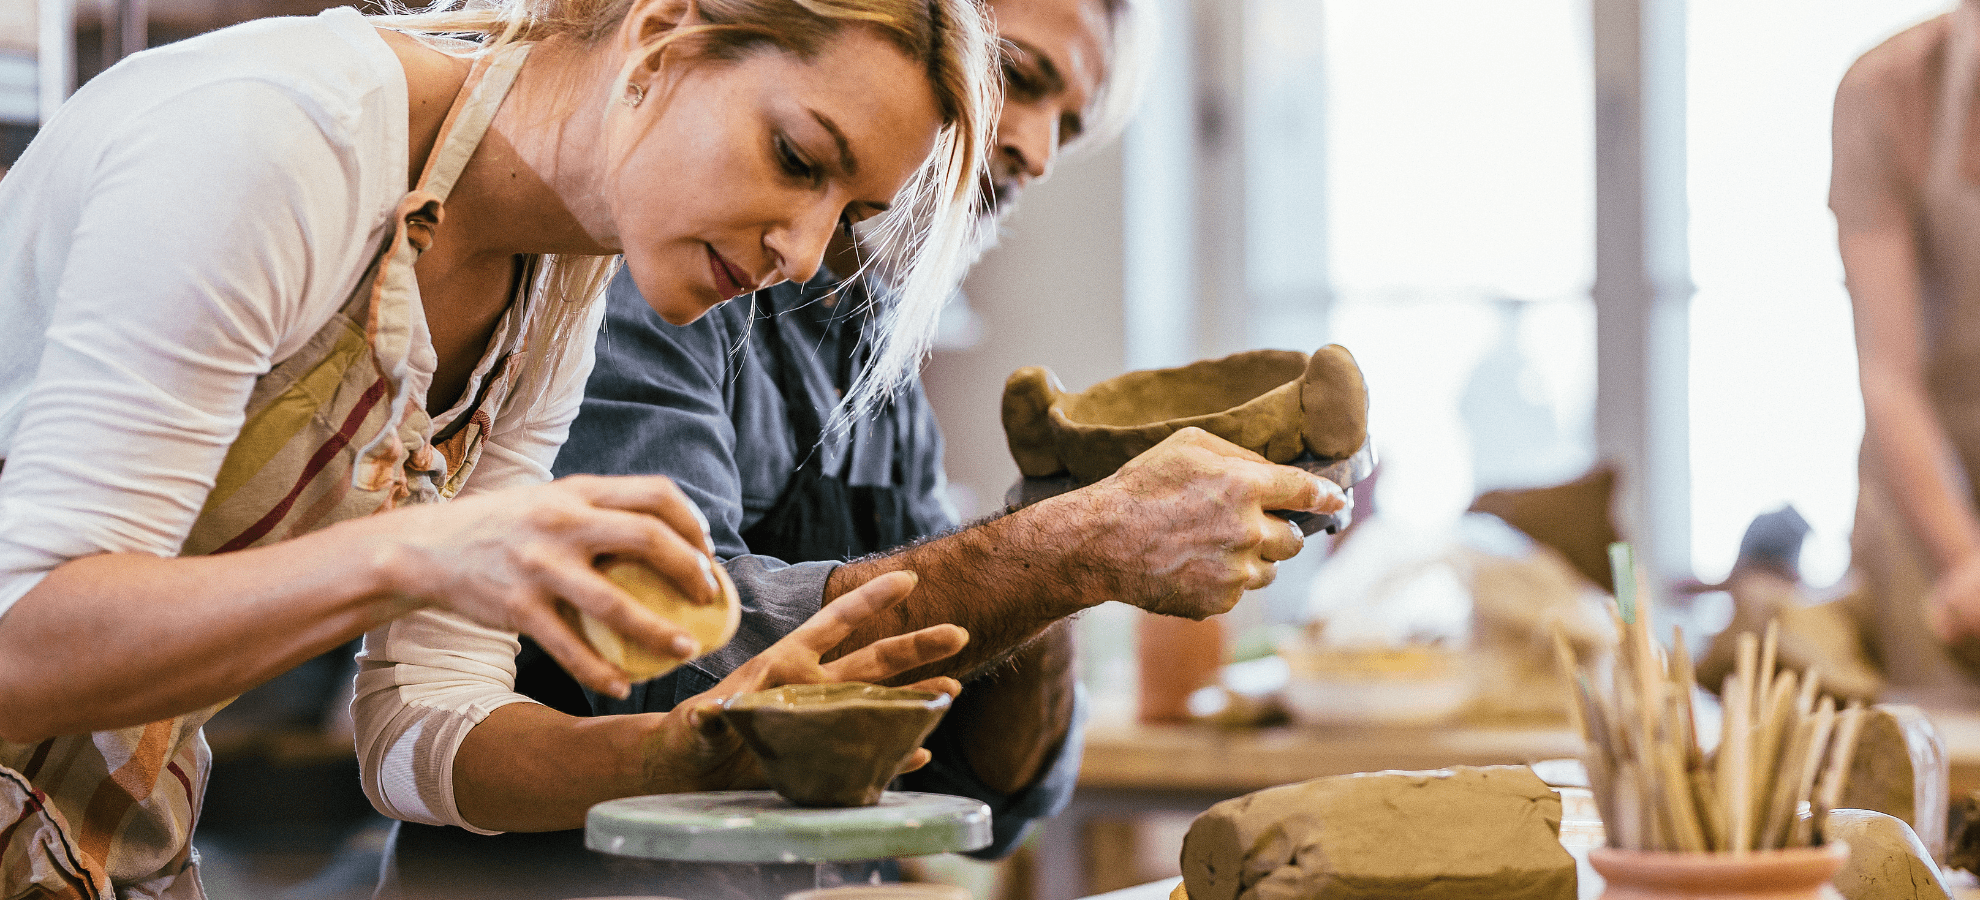 Man and woman in a pottery workshop making pottery.